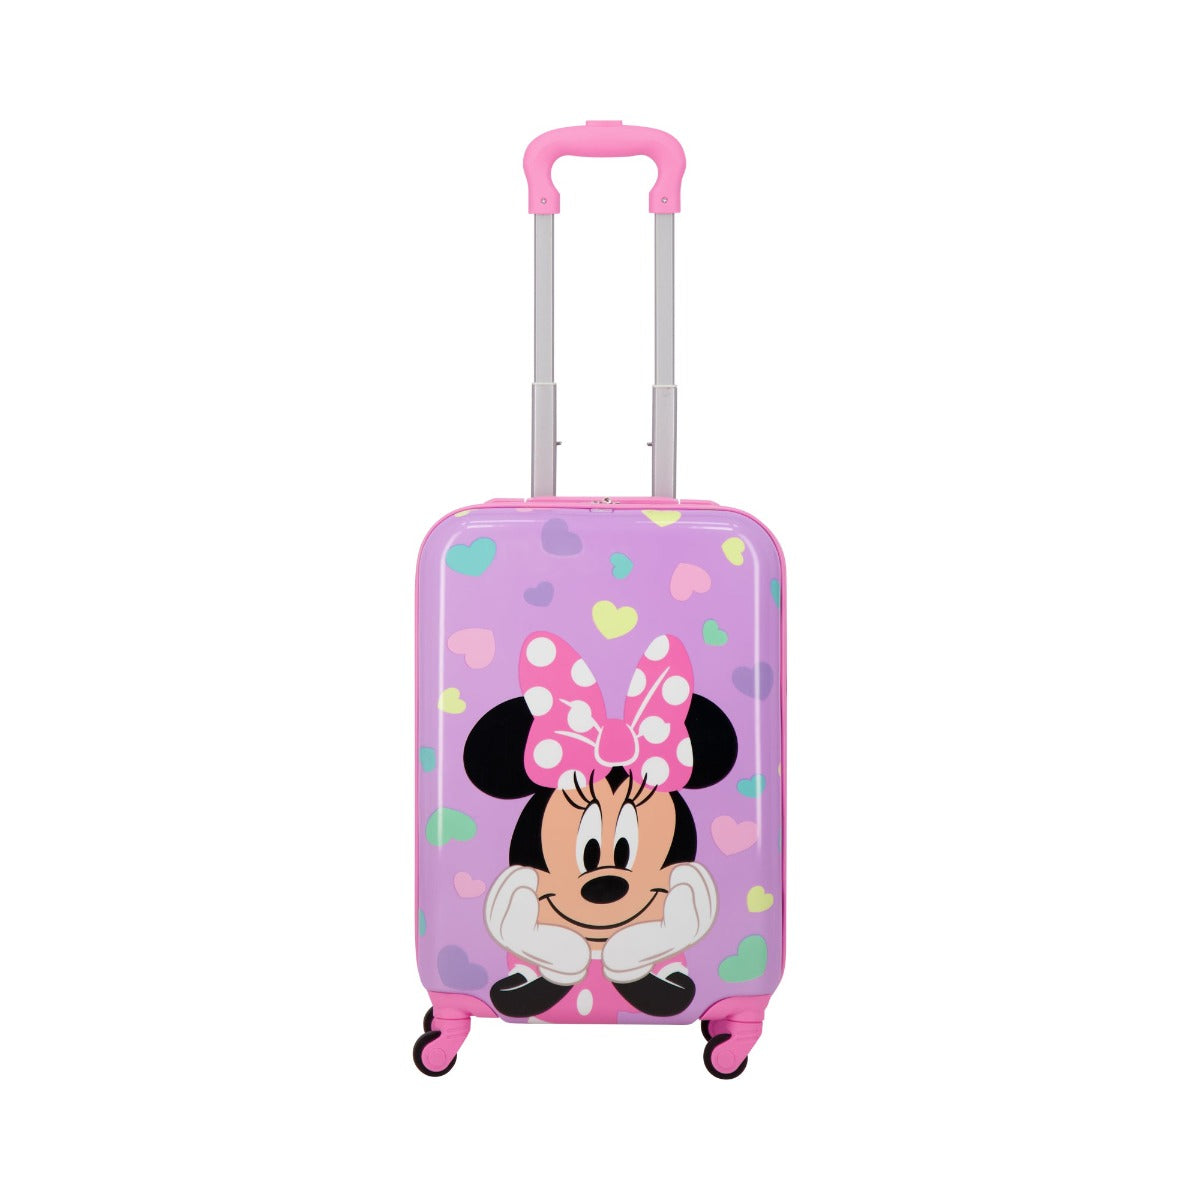 Pink Disney Ful Minnie Mouse hearts all over 2 piece set - 21 inch carry-on suitcase for kids